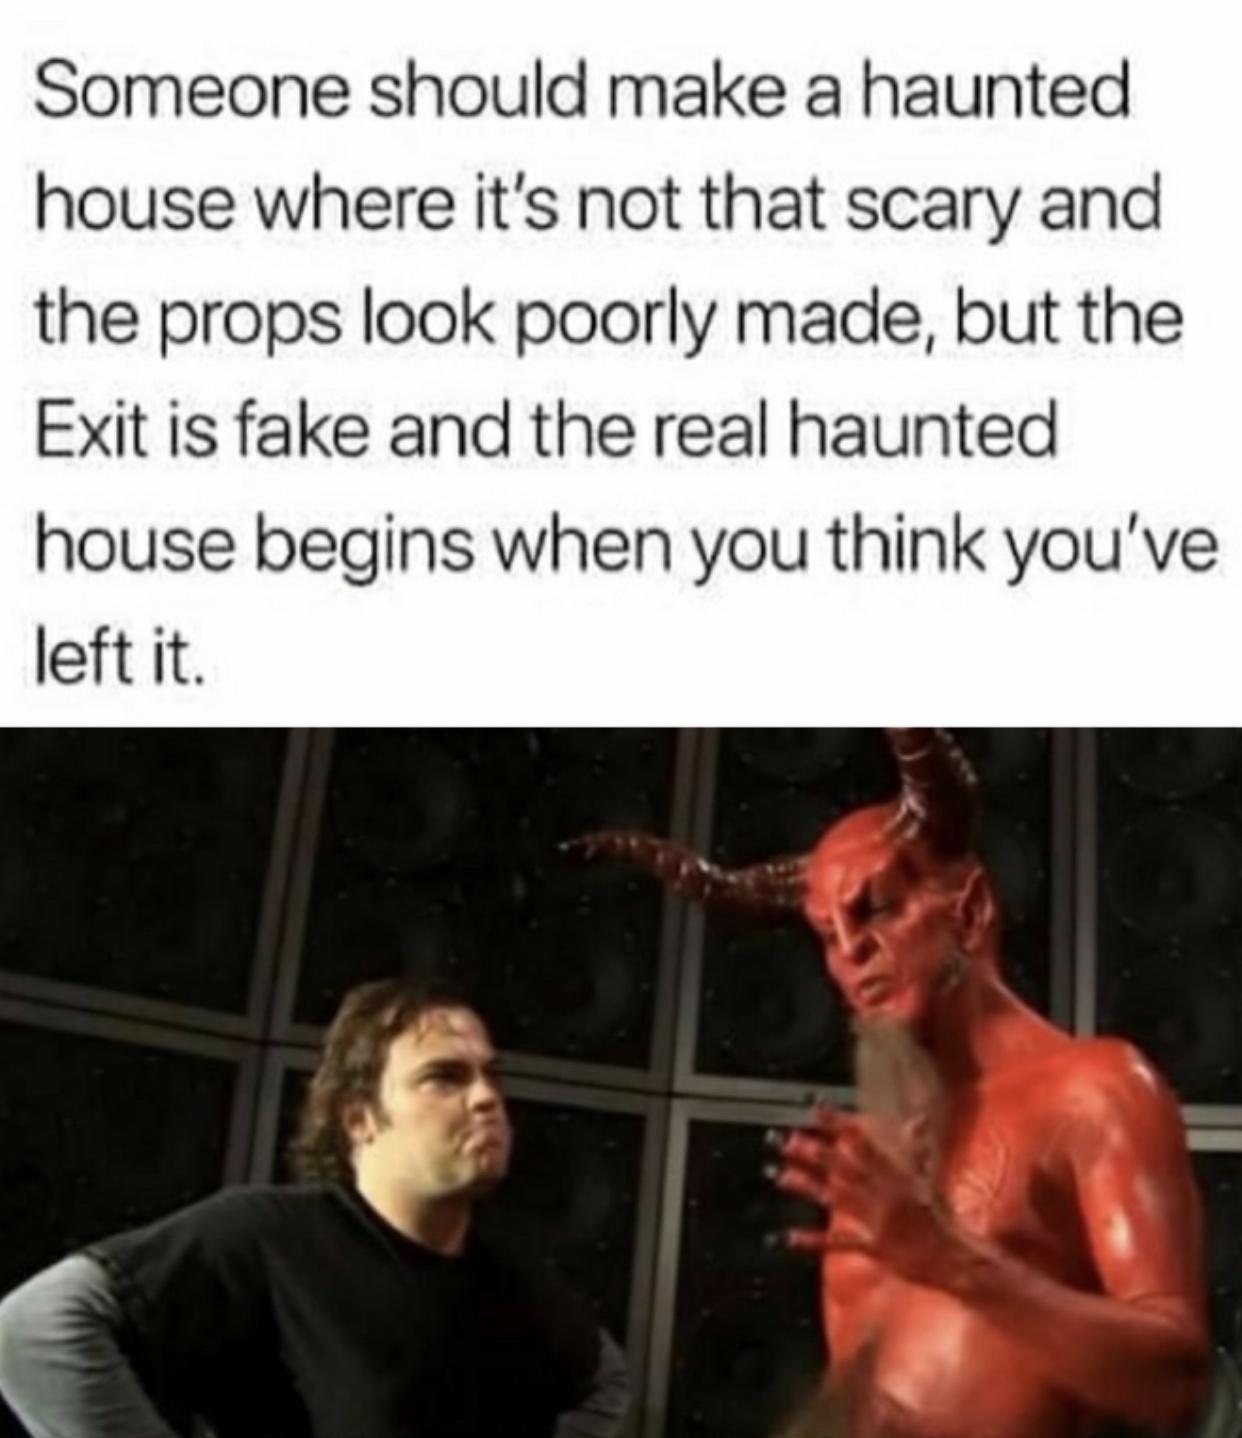 well i just wanna say i m a huge fan meme template - Someone should make a haunted house where it's not that scary and the props look poorly made, but the Exit is fake and the real haunted house begins when you think you've left it.